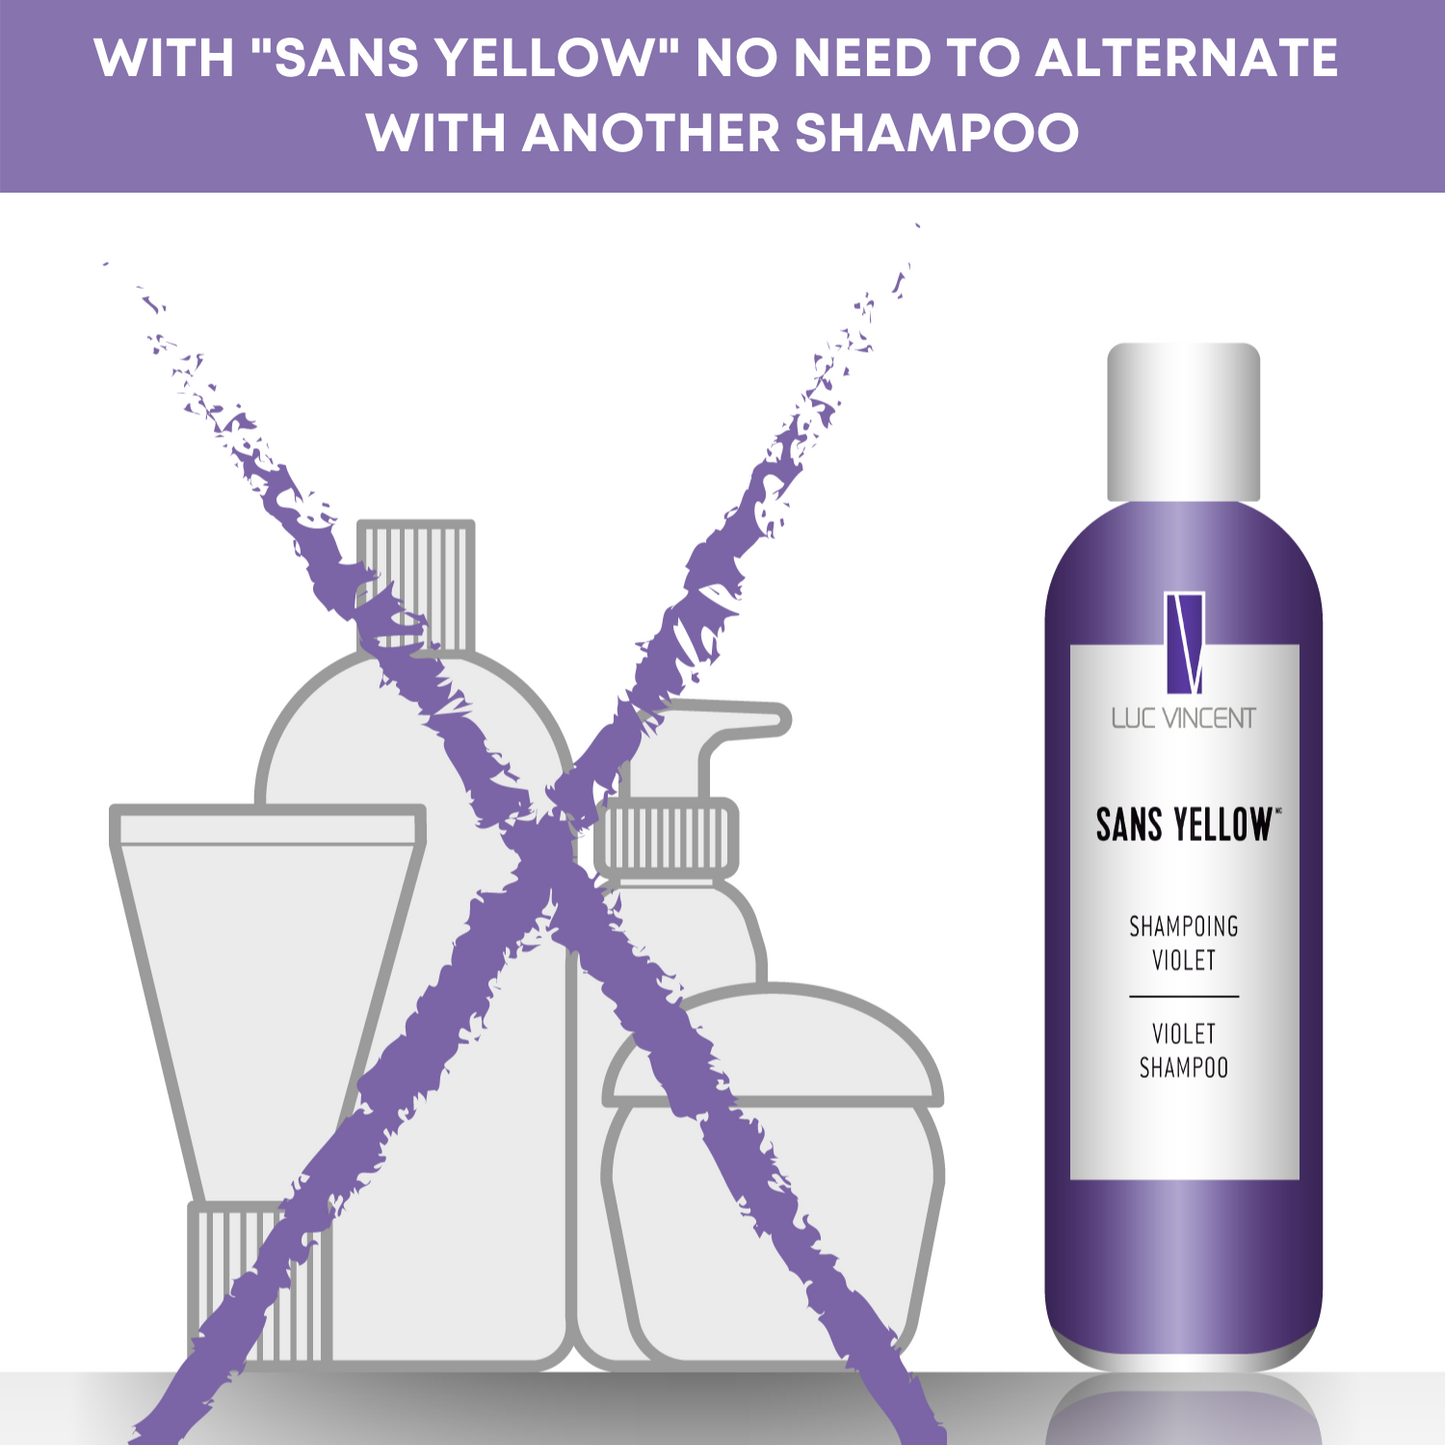 1L Bottle: SANS YELLOW Shampoo - Eliminate undesirable yellow tones in your hair